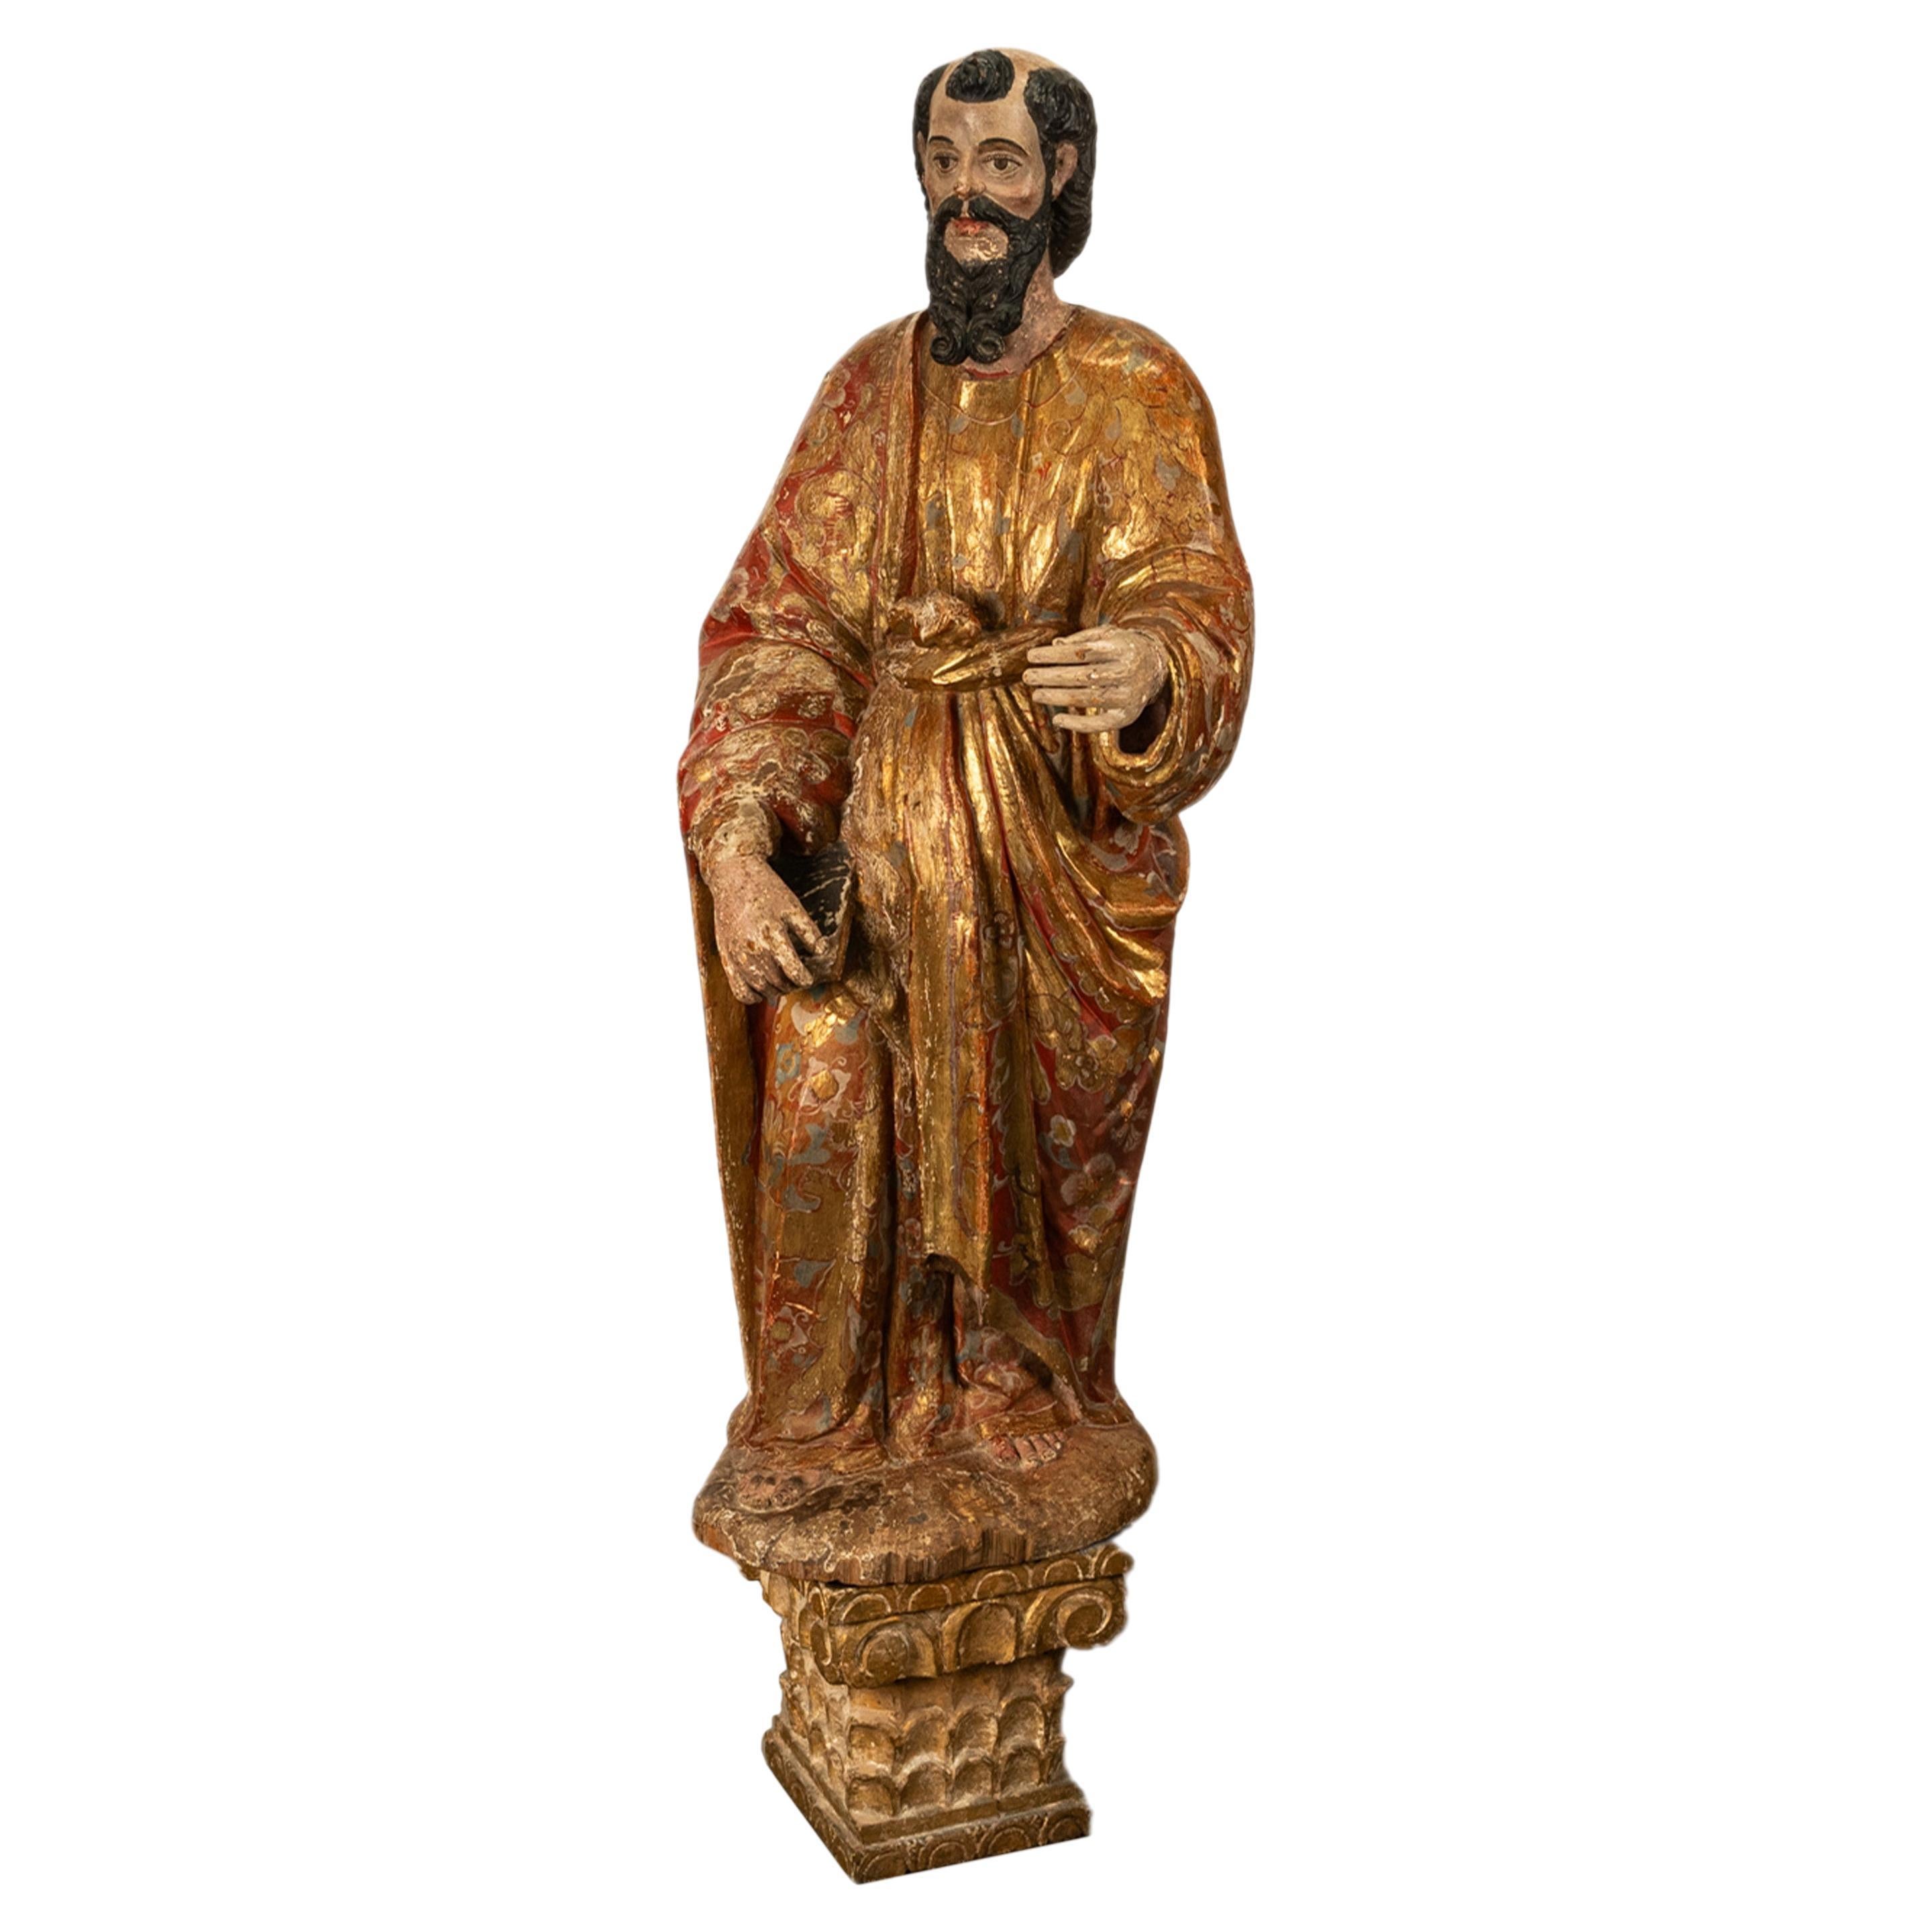 A rare antique Spanish Colonial life size carved Santo figure of St. Paul the Evangelist, Mexico, circa 1750.
A wonderful carved colonial statue in the style of the Castilian School, the statue depicts St. Paul holding a bible in his left hand and